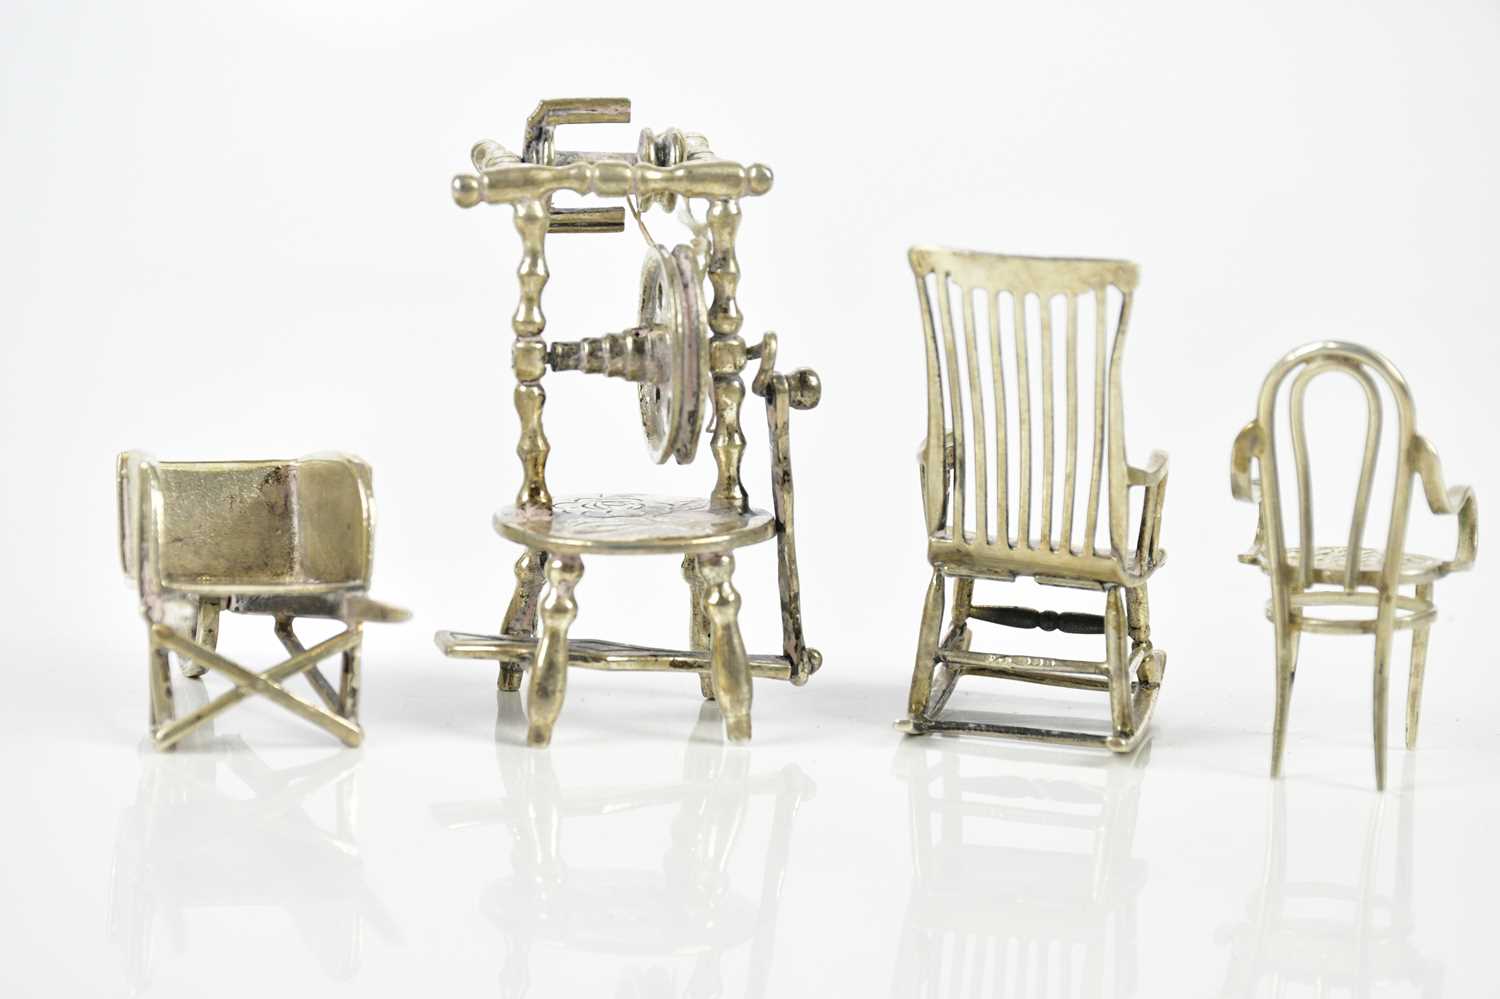 A group of miniature items including rocking chair, spinning wheel, elbow chair and a wheelbarrow, - Image 2 of 3